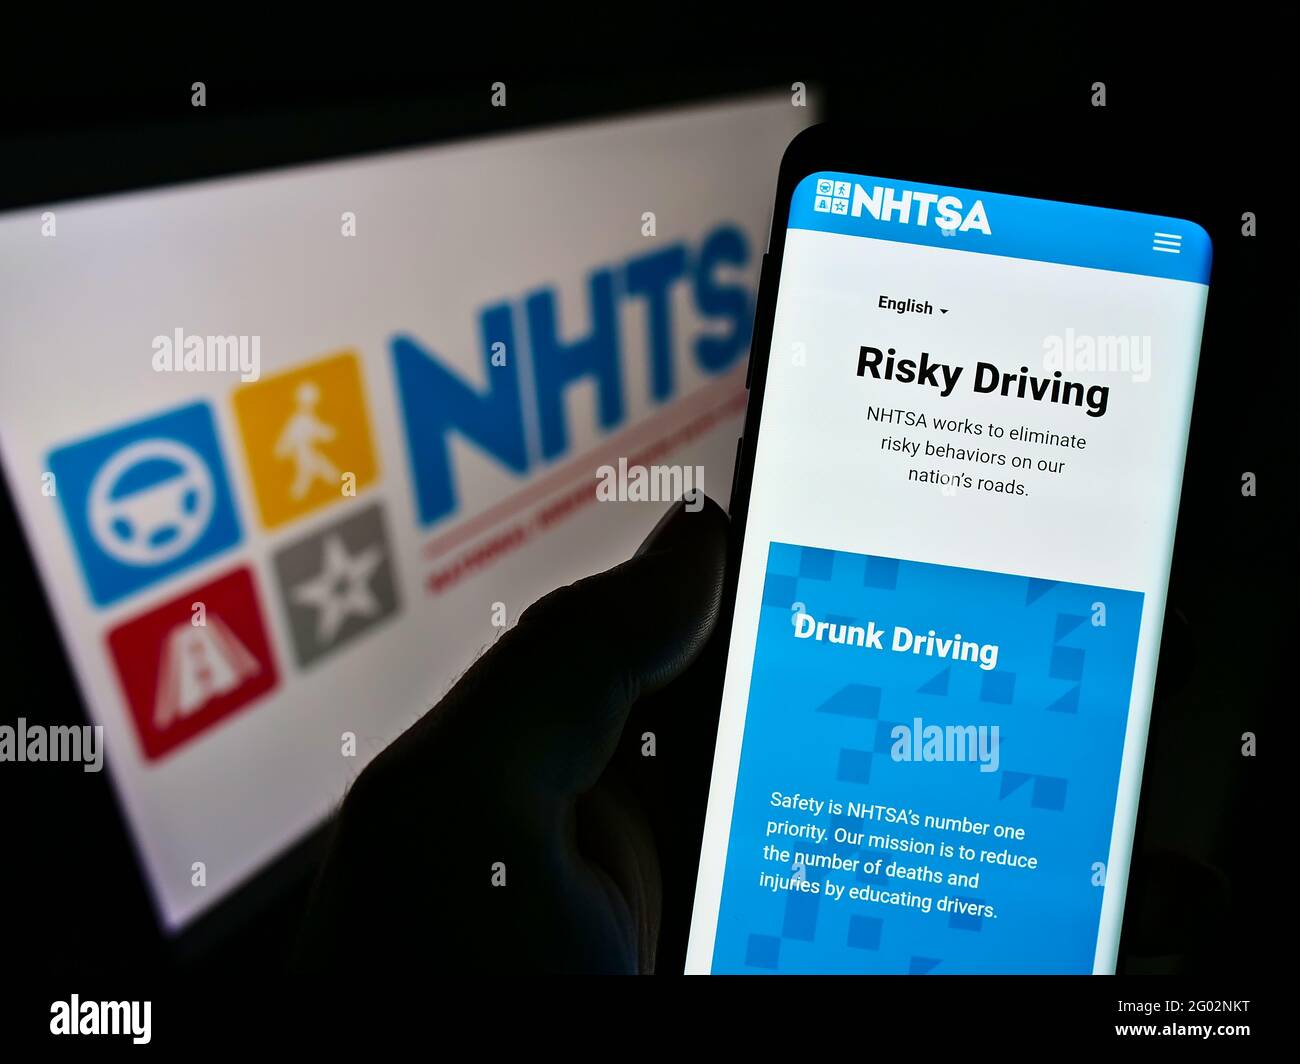 Person holding cellphone with website of National Highway Traffic Safety Administration (NHTSA) on screen with logo. Focus on center of phone display. Stock Photo